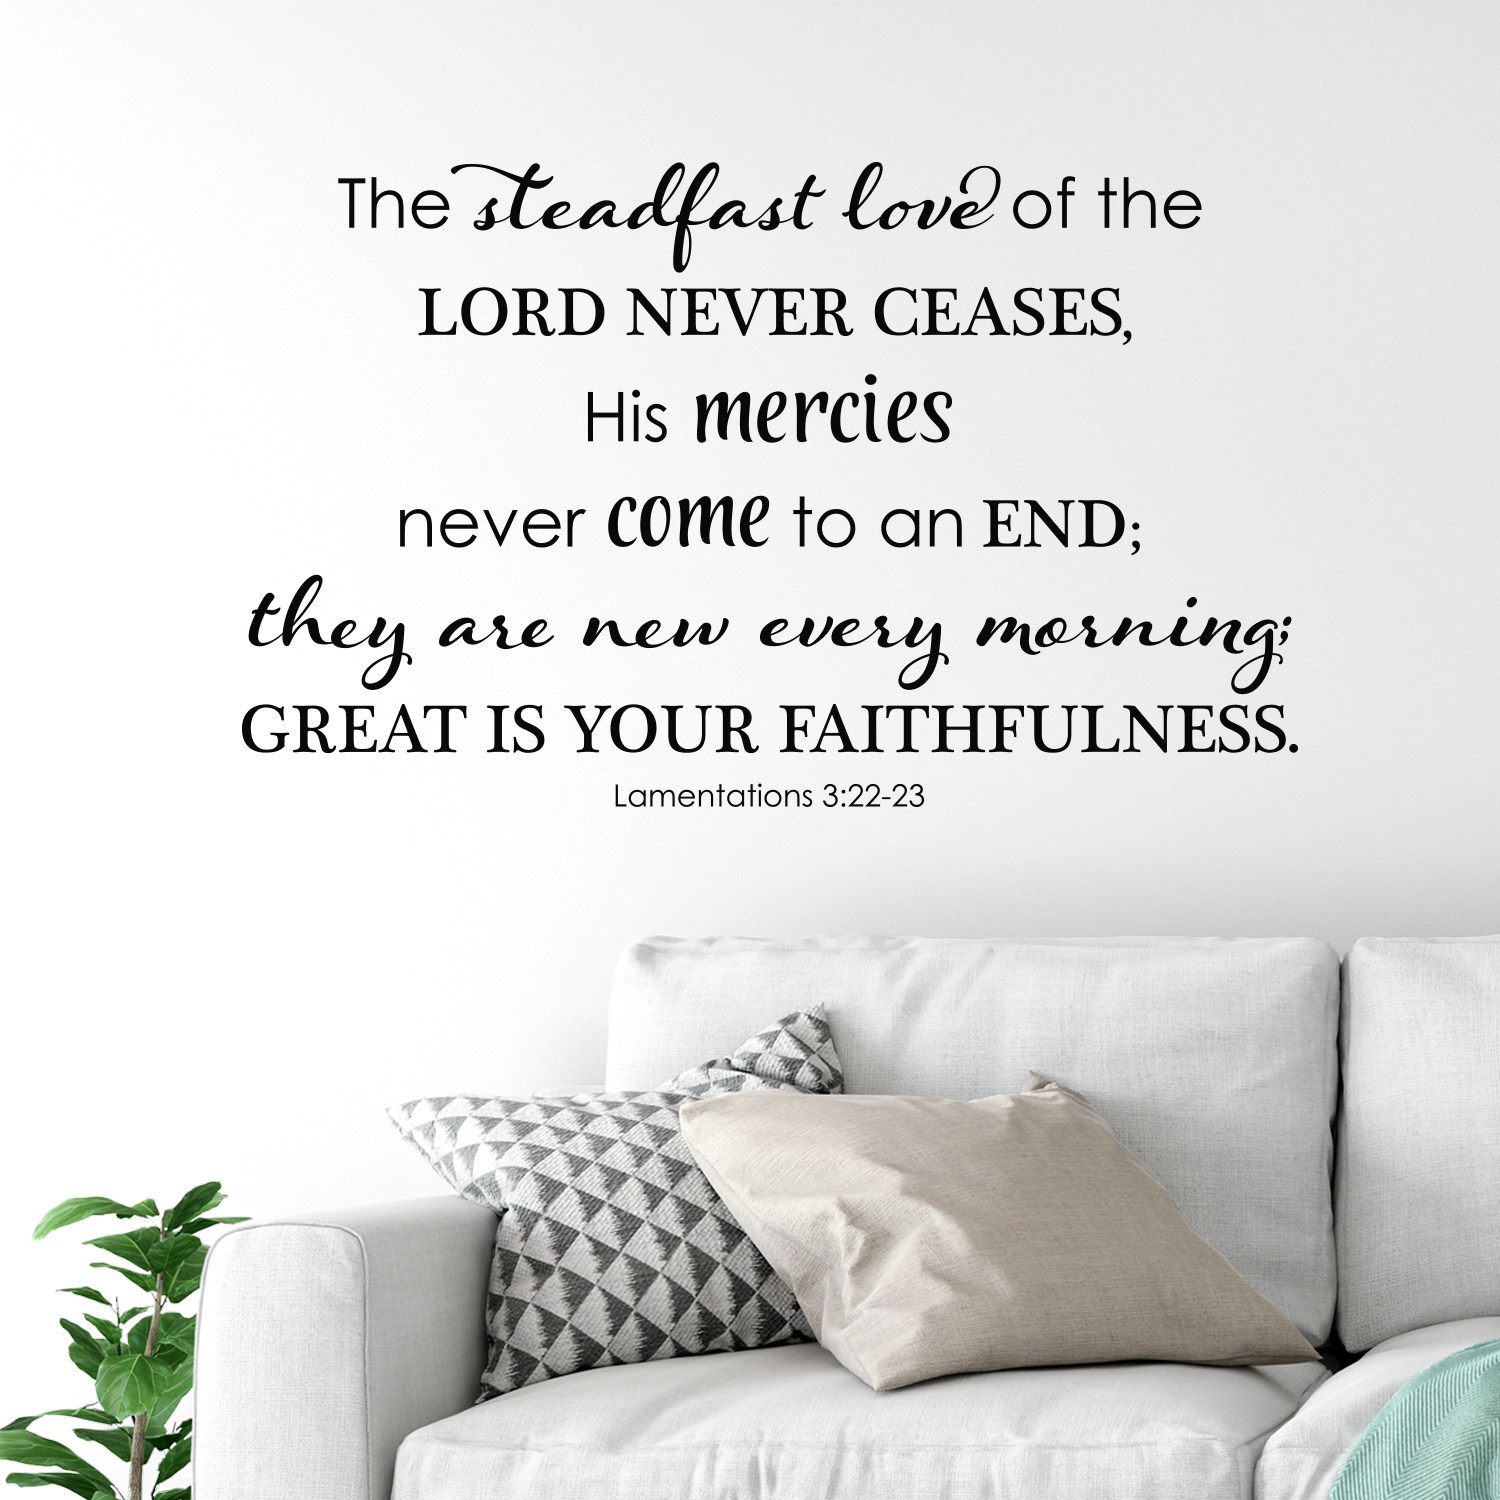 Lamentations 3v22-23 Vinyl Wall Decal The steadfast love of the Lord